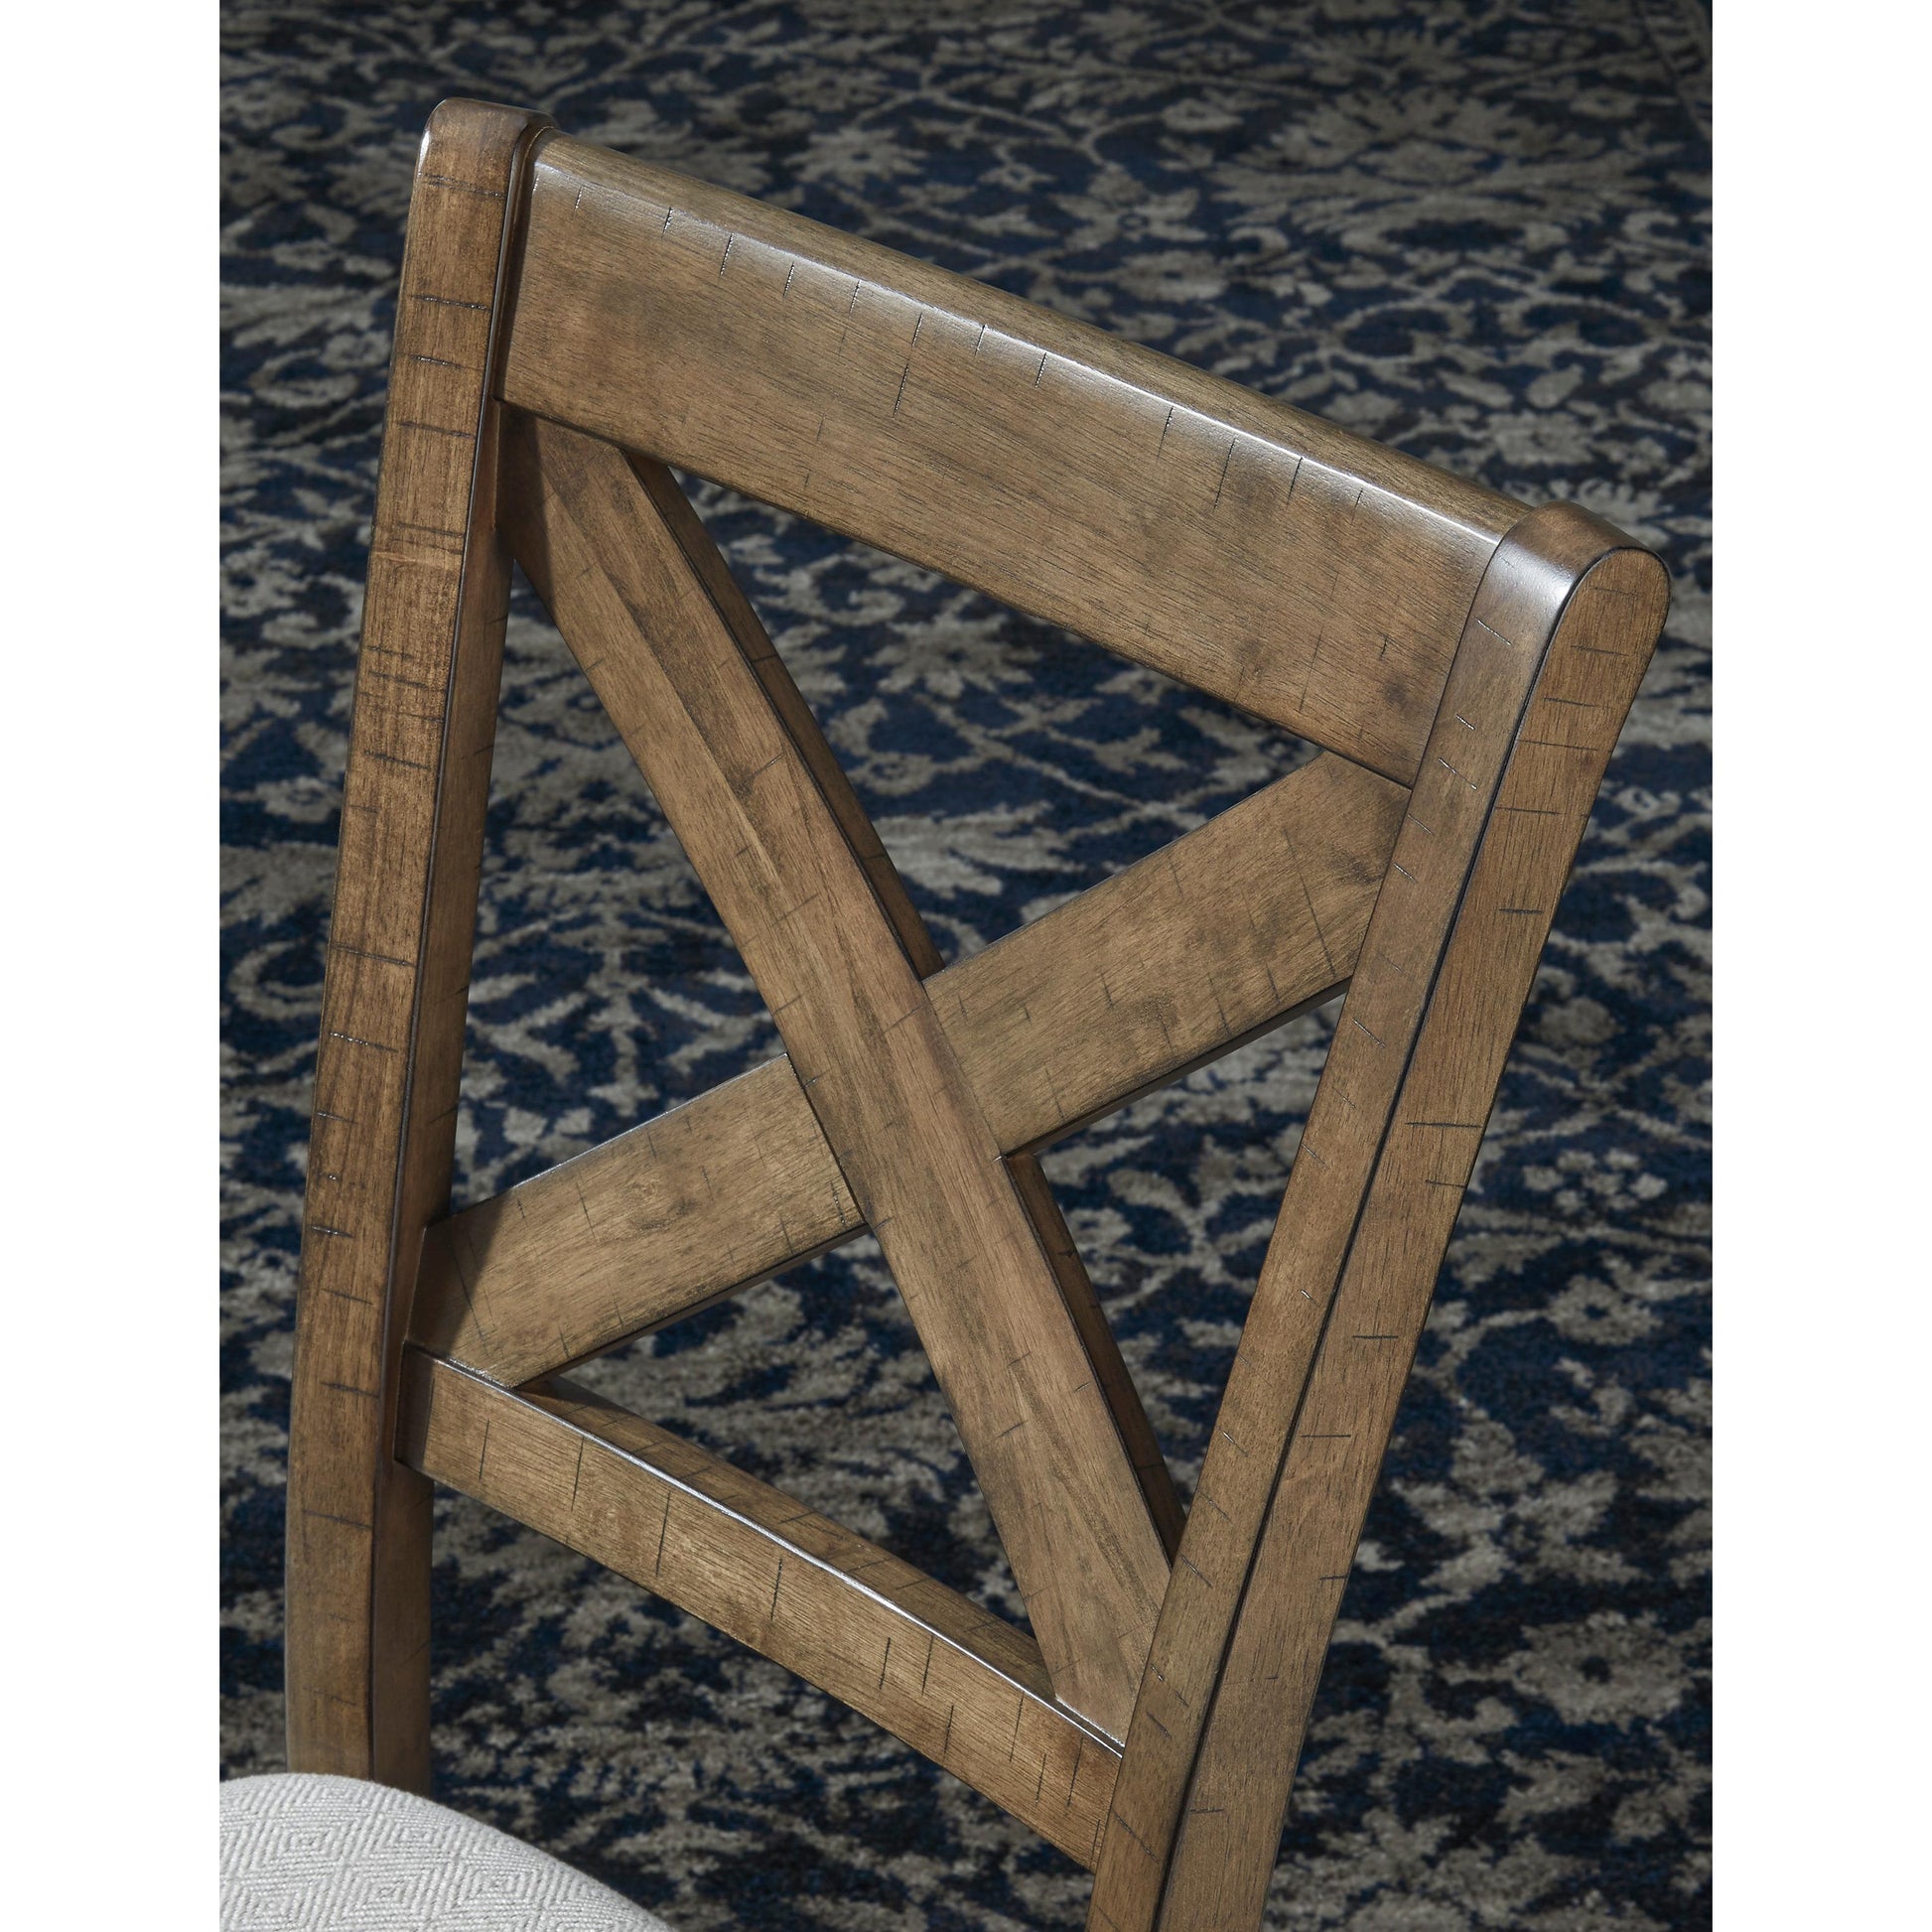 Signature Design by Ashley Moriville Dining Chair D631-01